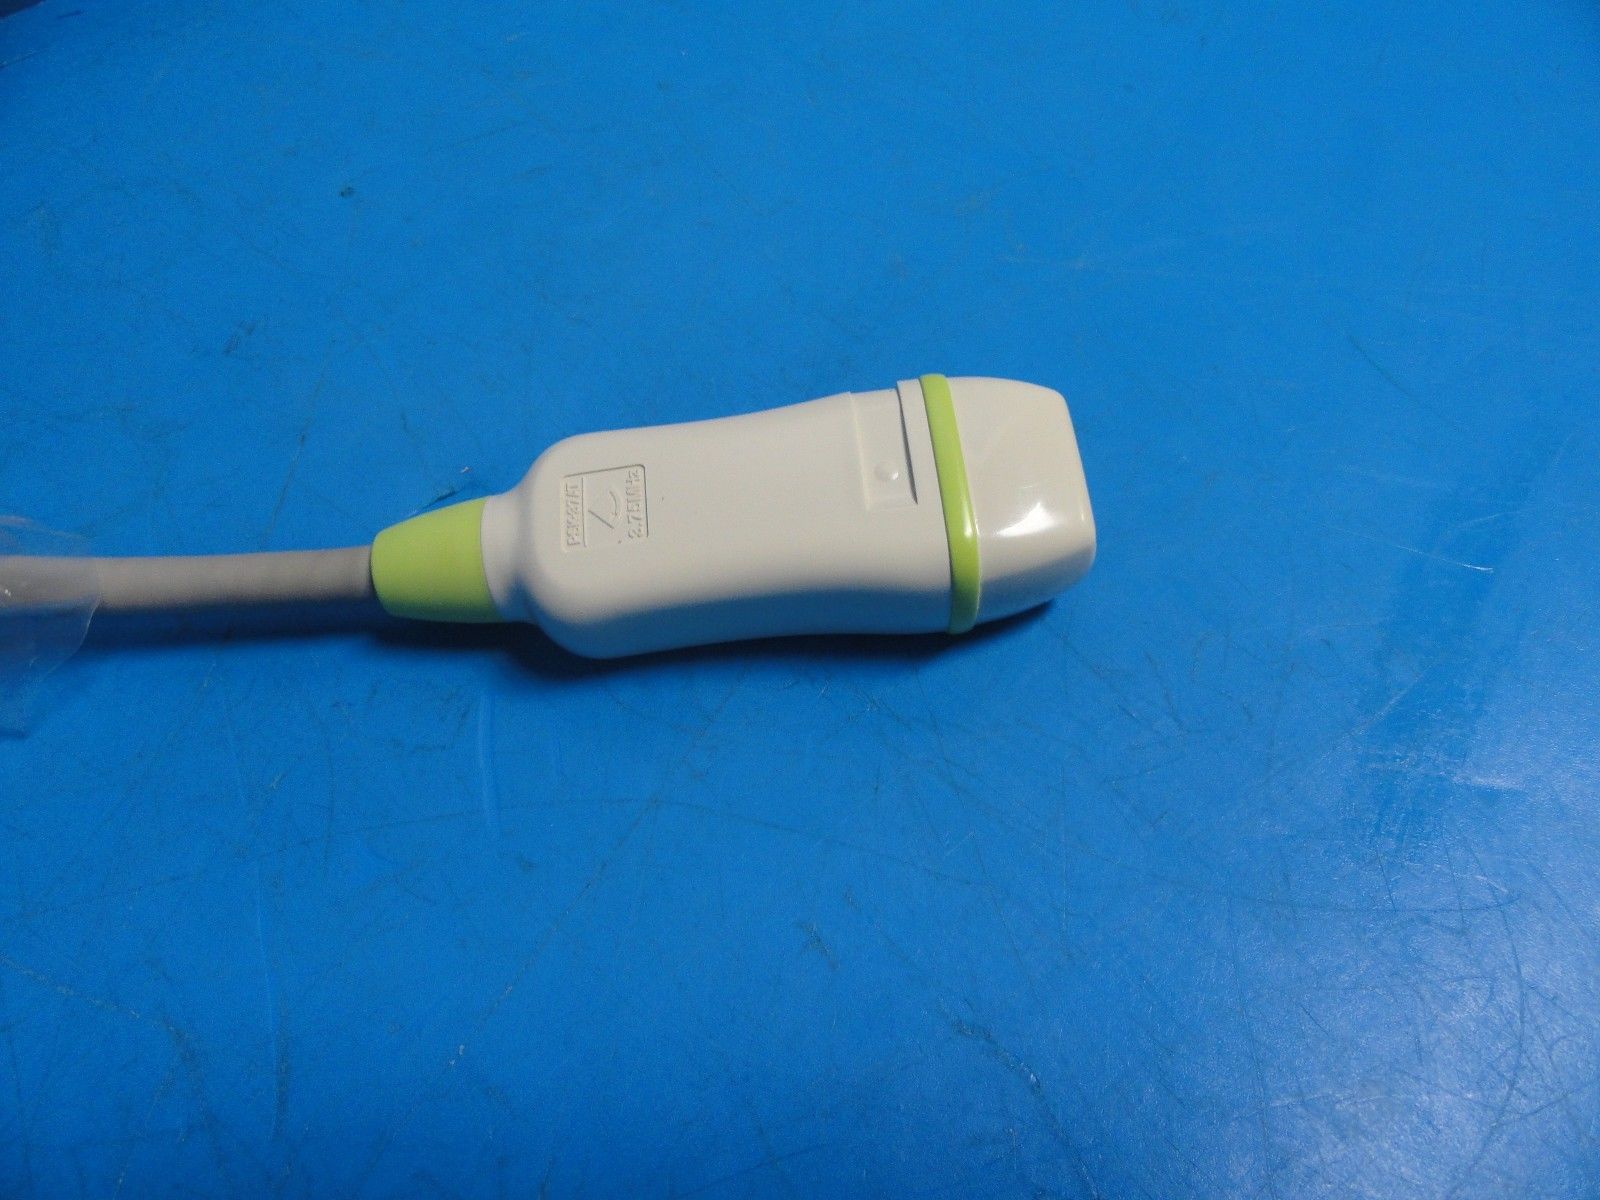 Toshiba PSK-37AT Phased Array Ultrasound Probe for PowerVision 7000 (8951) DIAGNOSTIC ULTRASOUND MACHINES FOR SALE